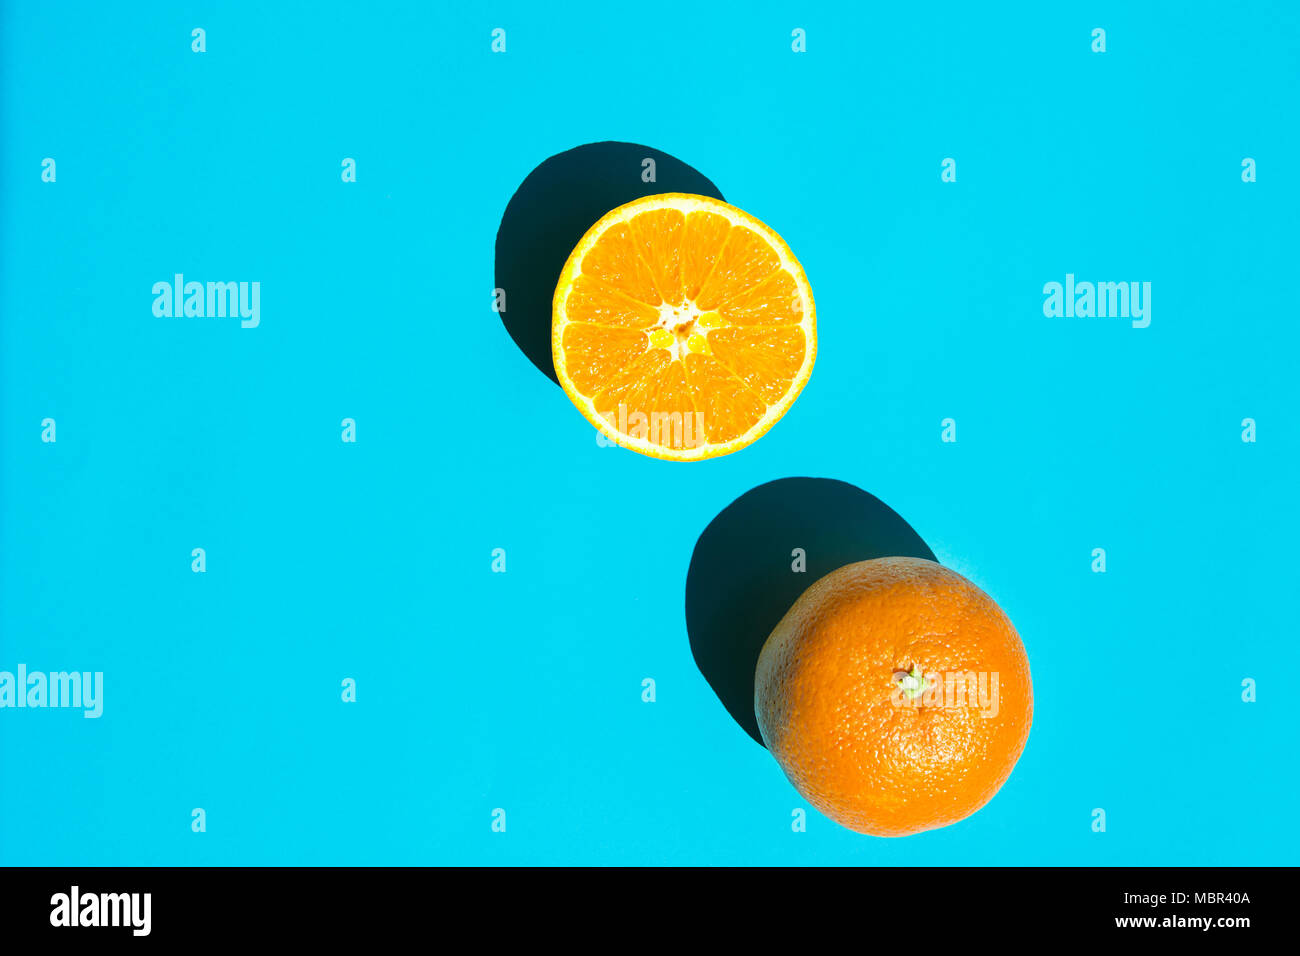 Whole and Halved Ripe Juicy Orange on Blue Background. Bright Harsh Sunlight Deep Shadow. Vibrant Neon Colors. Summer Tropical Vacation Travel Fashion Stock Photo